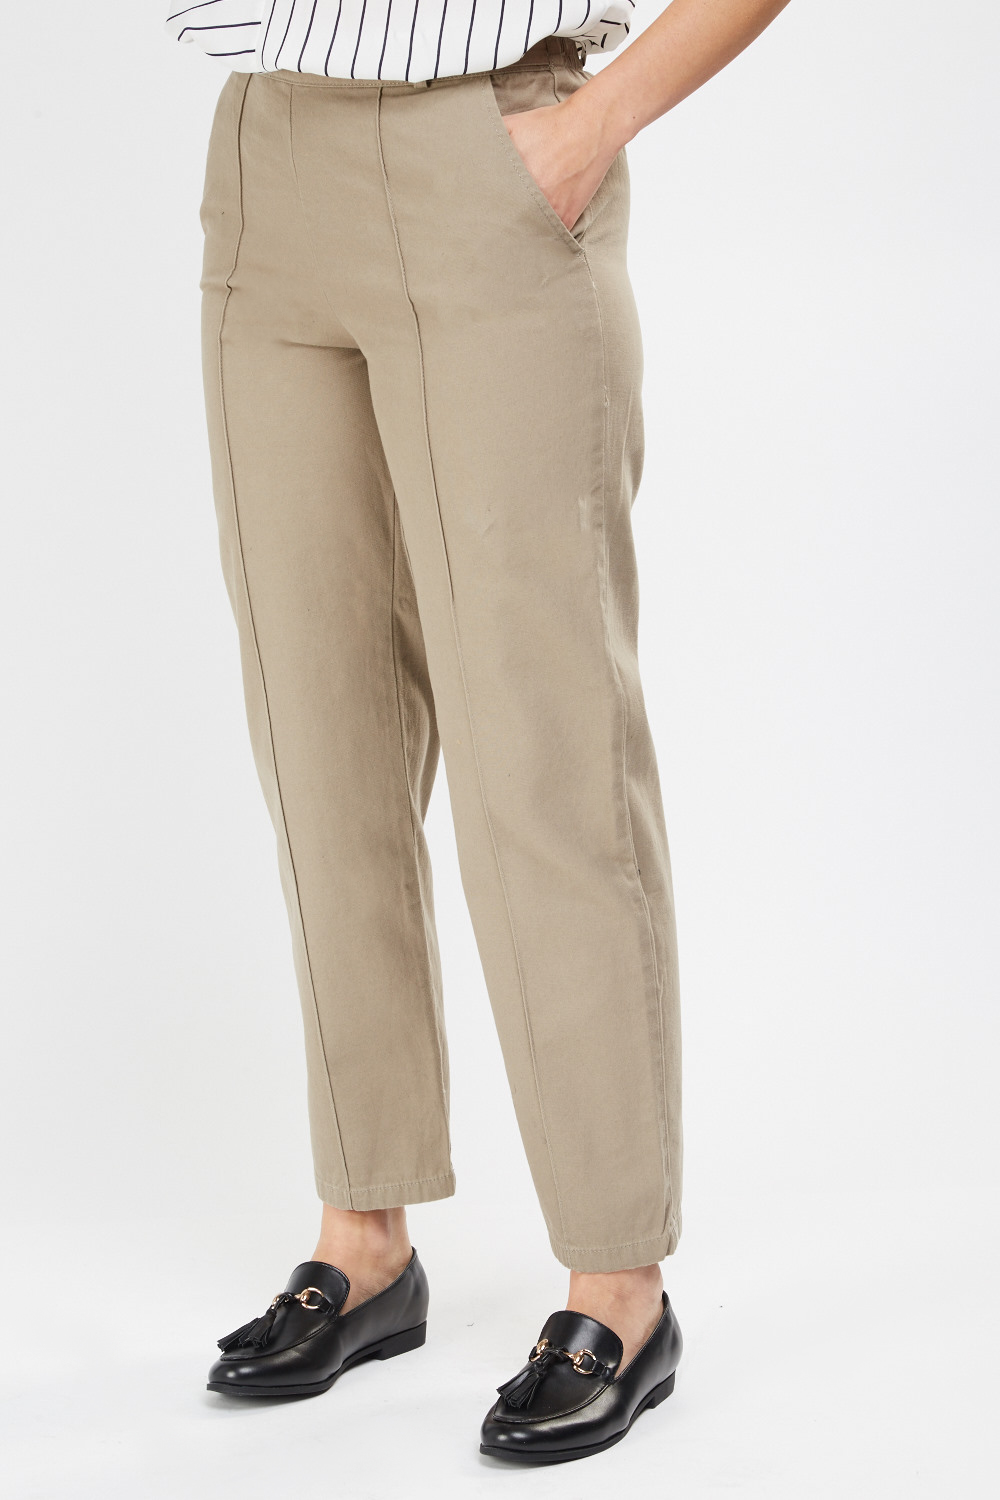 Straight Cut Peg Trousers - Just $3